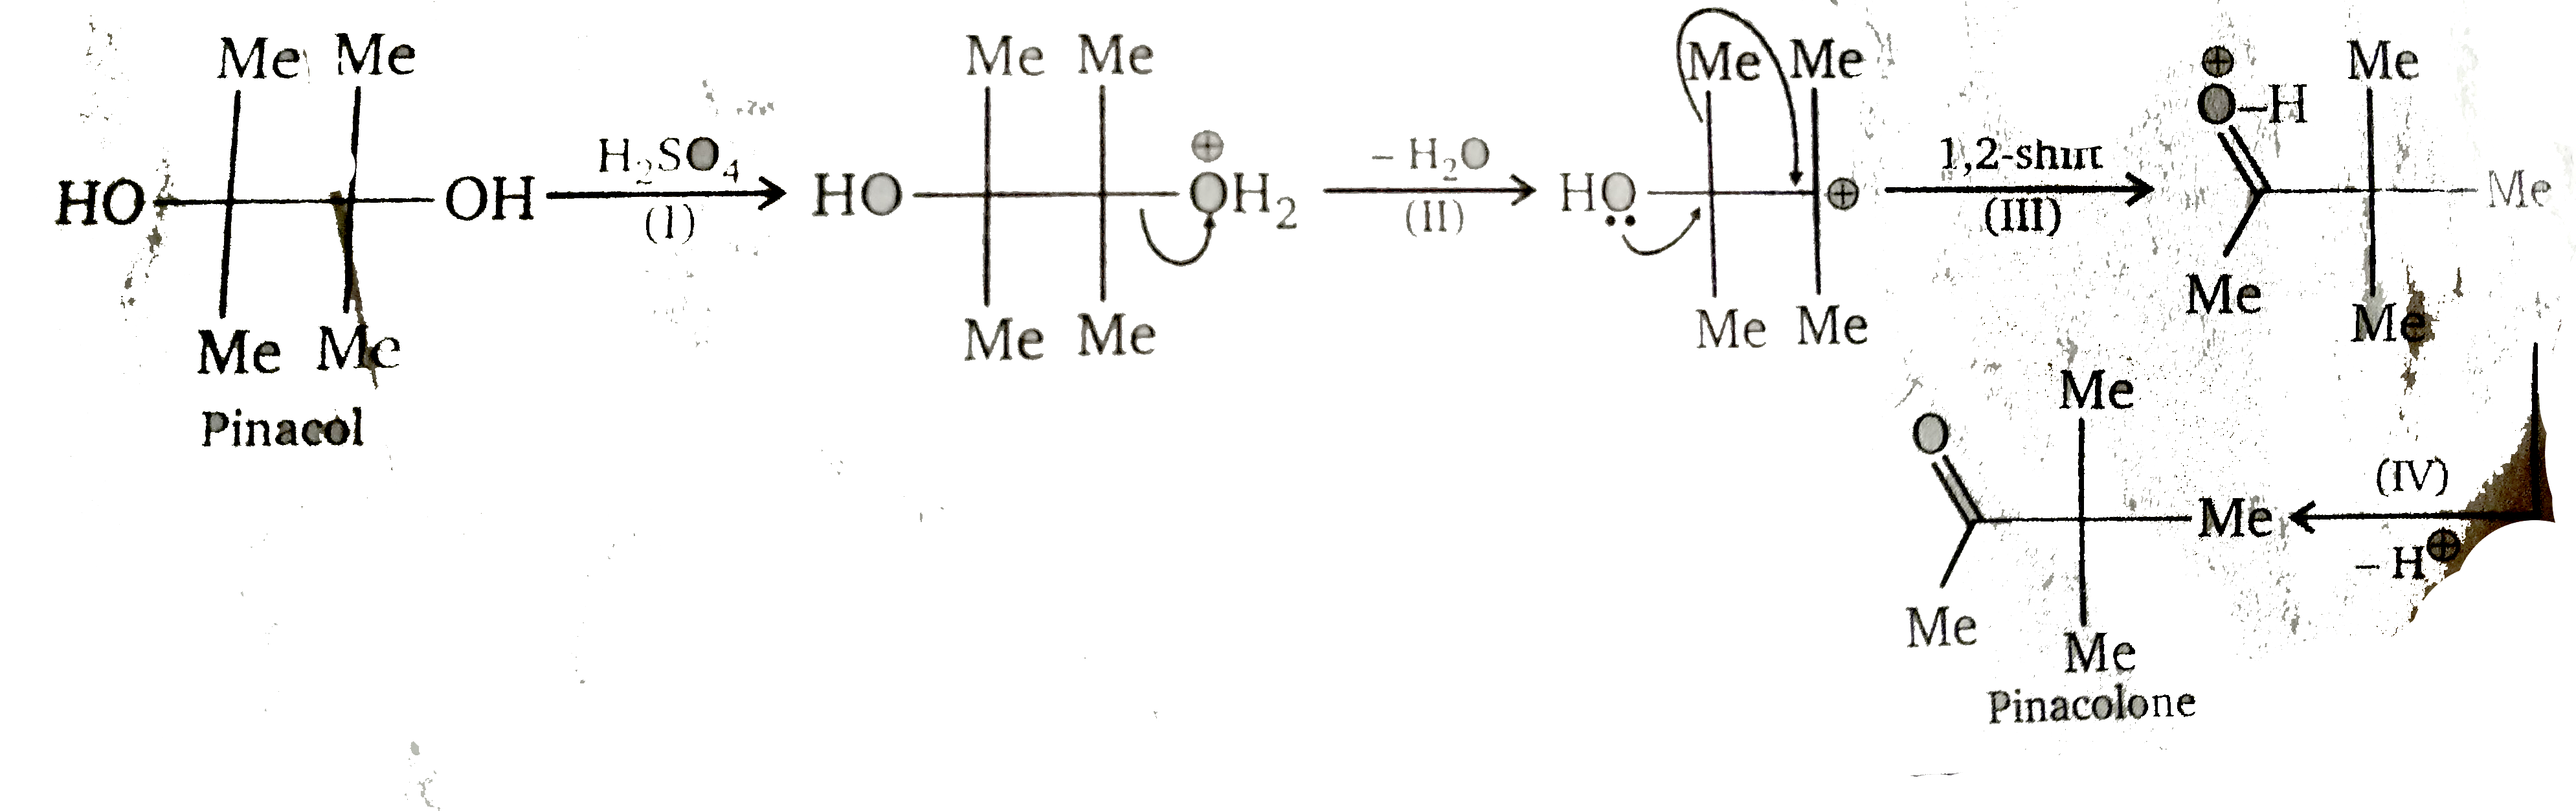 Di-tert-glycols rearrange in the presence of acid to give alpha-trtiary ketones. The trivial name of the simplest glycol of this type is pinacol, and this type of reaction therefore is named pinacol rearrangement (in this specific case, the reaction is called a pinacol-pinacolone rearrangement). The rearrangement involves 4 steps. one of the hydroxyl group is protonated in the first step. A molecule of water is eliminated in the second step and a tertiary carbocation is formed. the carbocation rearranges in the third step into a more stable carboxonium ion via a [1, 2] rearrangement. In the last step, the carboxonium ion is deprotonated and the product ketone is obtained.         How many products obtained in above reaction ?